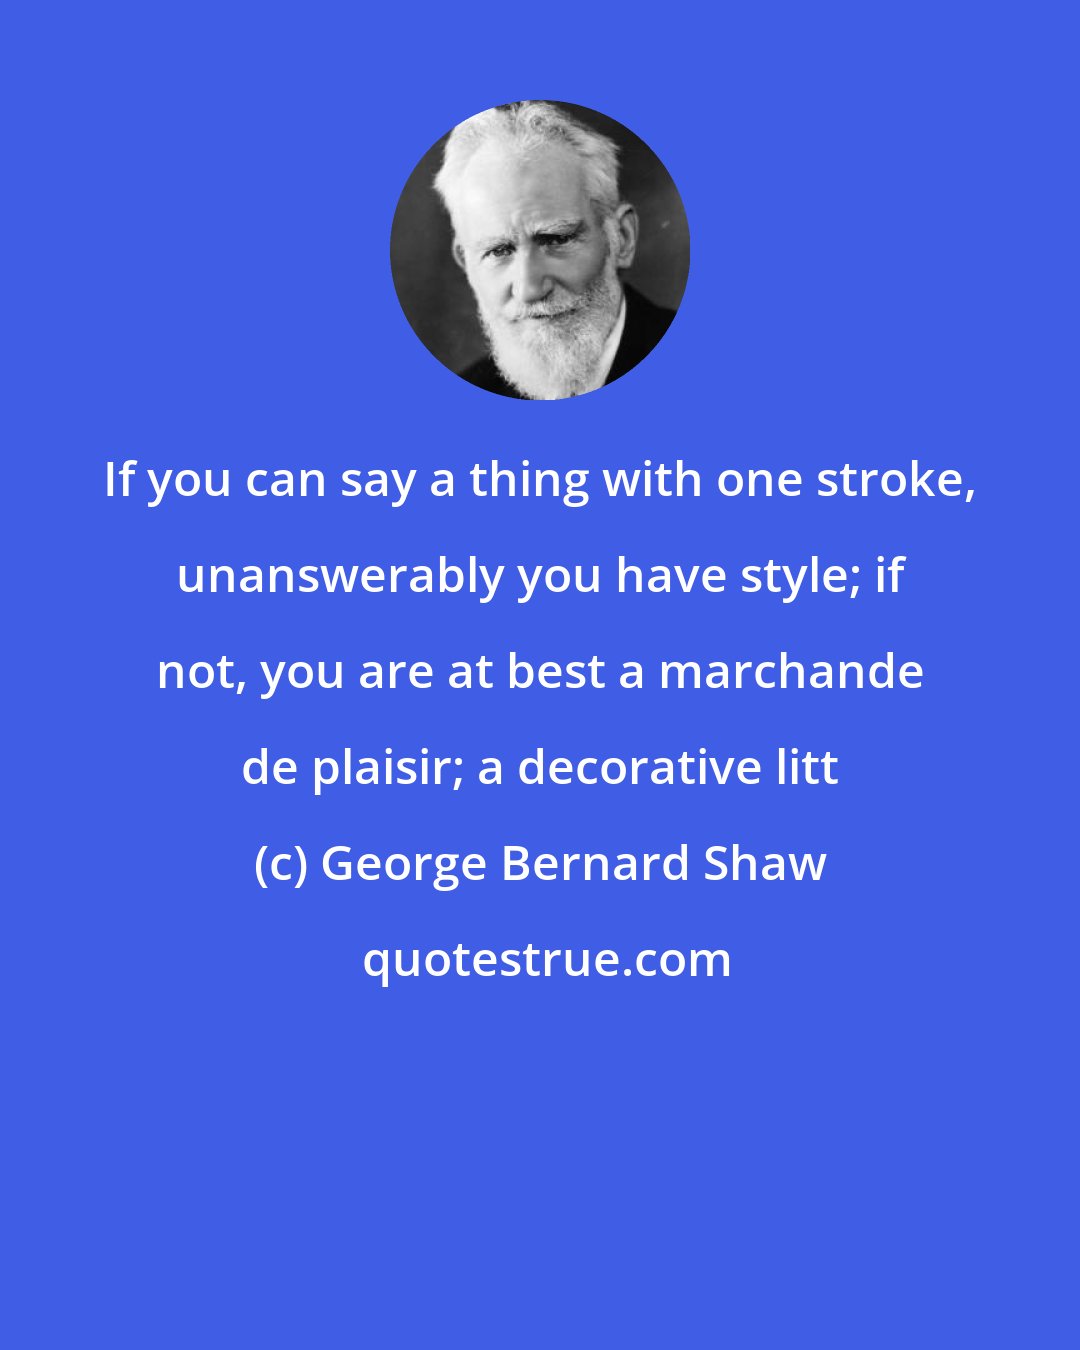 George Bernard Shaw: If you can say a thing with one stroke, unanswerably you have style; if not, you are at best a marchande de plaisir; a decorative litt